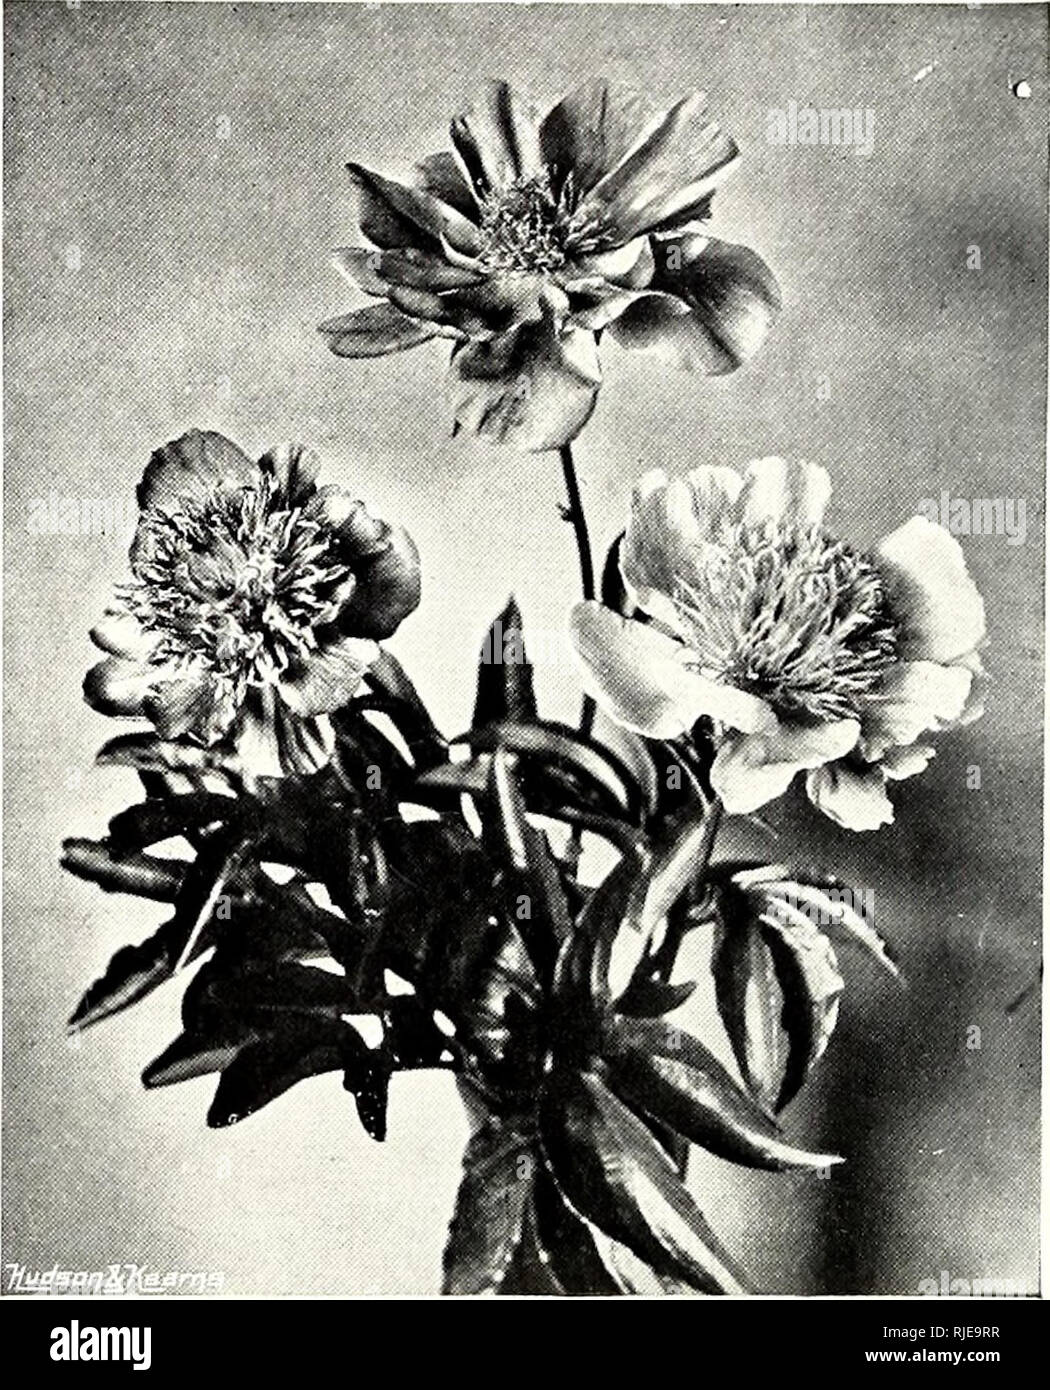 . The century book of gardening; a comprehensive work for every lover of the garden. Gardening. DOUBLE HIGH-CENTRED PEONIES. disclose ten to thirty seeds, about the size of peas, the fertile ones blue-black and the sterile of a bright scarlet, the effect being even more decorative than the flower displav. P. Wittmanniana, from Persia, flowers single, primrose yellow. The Tree Pseony, or Paeonia Moutan, was introduced over 100 years ago, and has probably been cultivated by the Chinese for more than 1,000 years. It is perfectly hardy, but occasionally gets badly crippled by spring frosts and cut Stock Photo